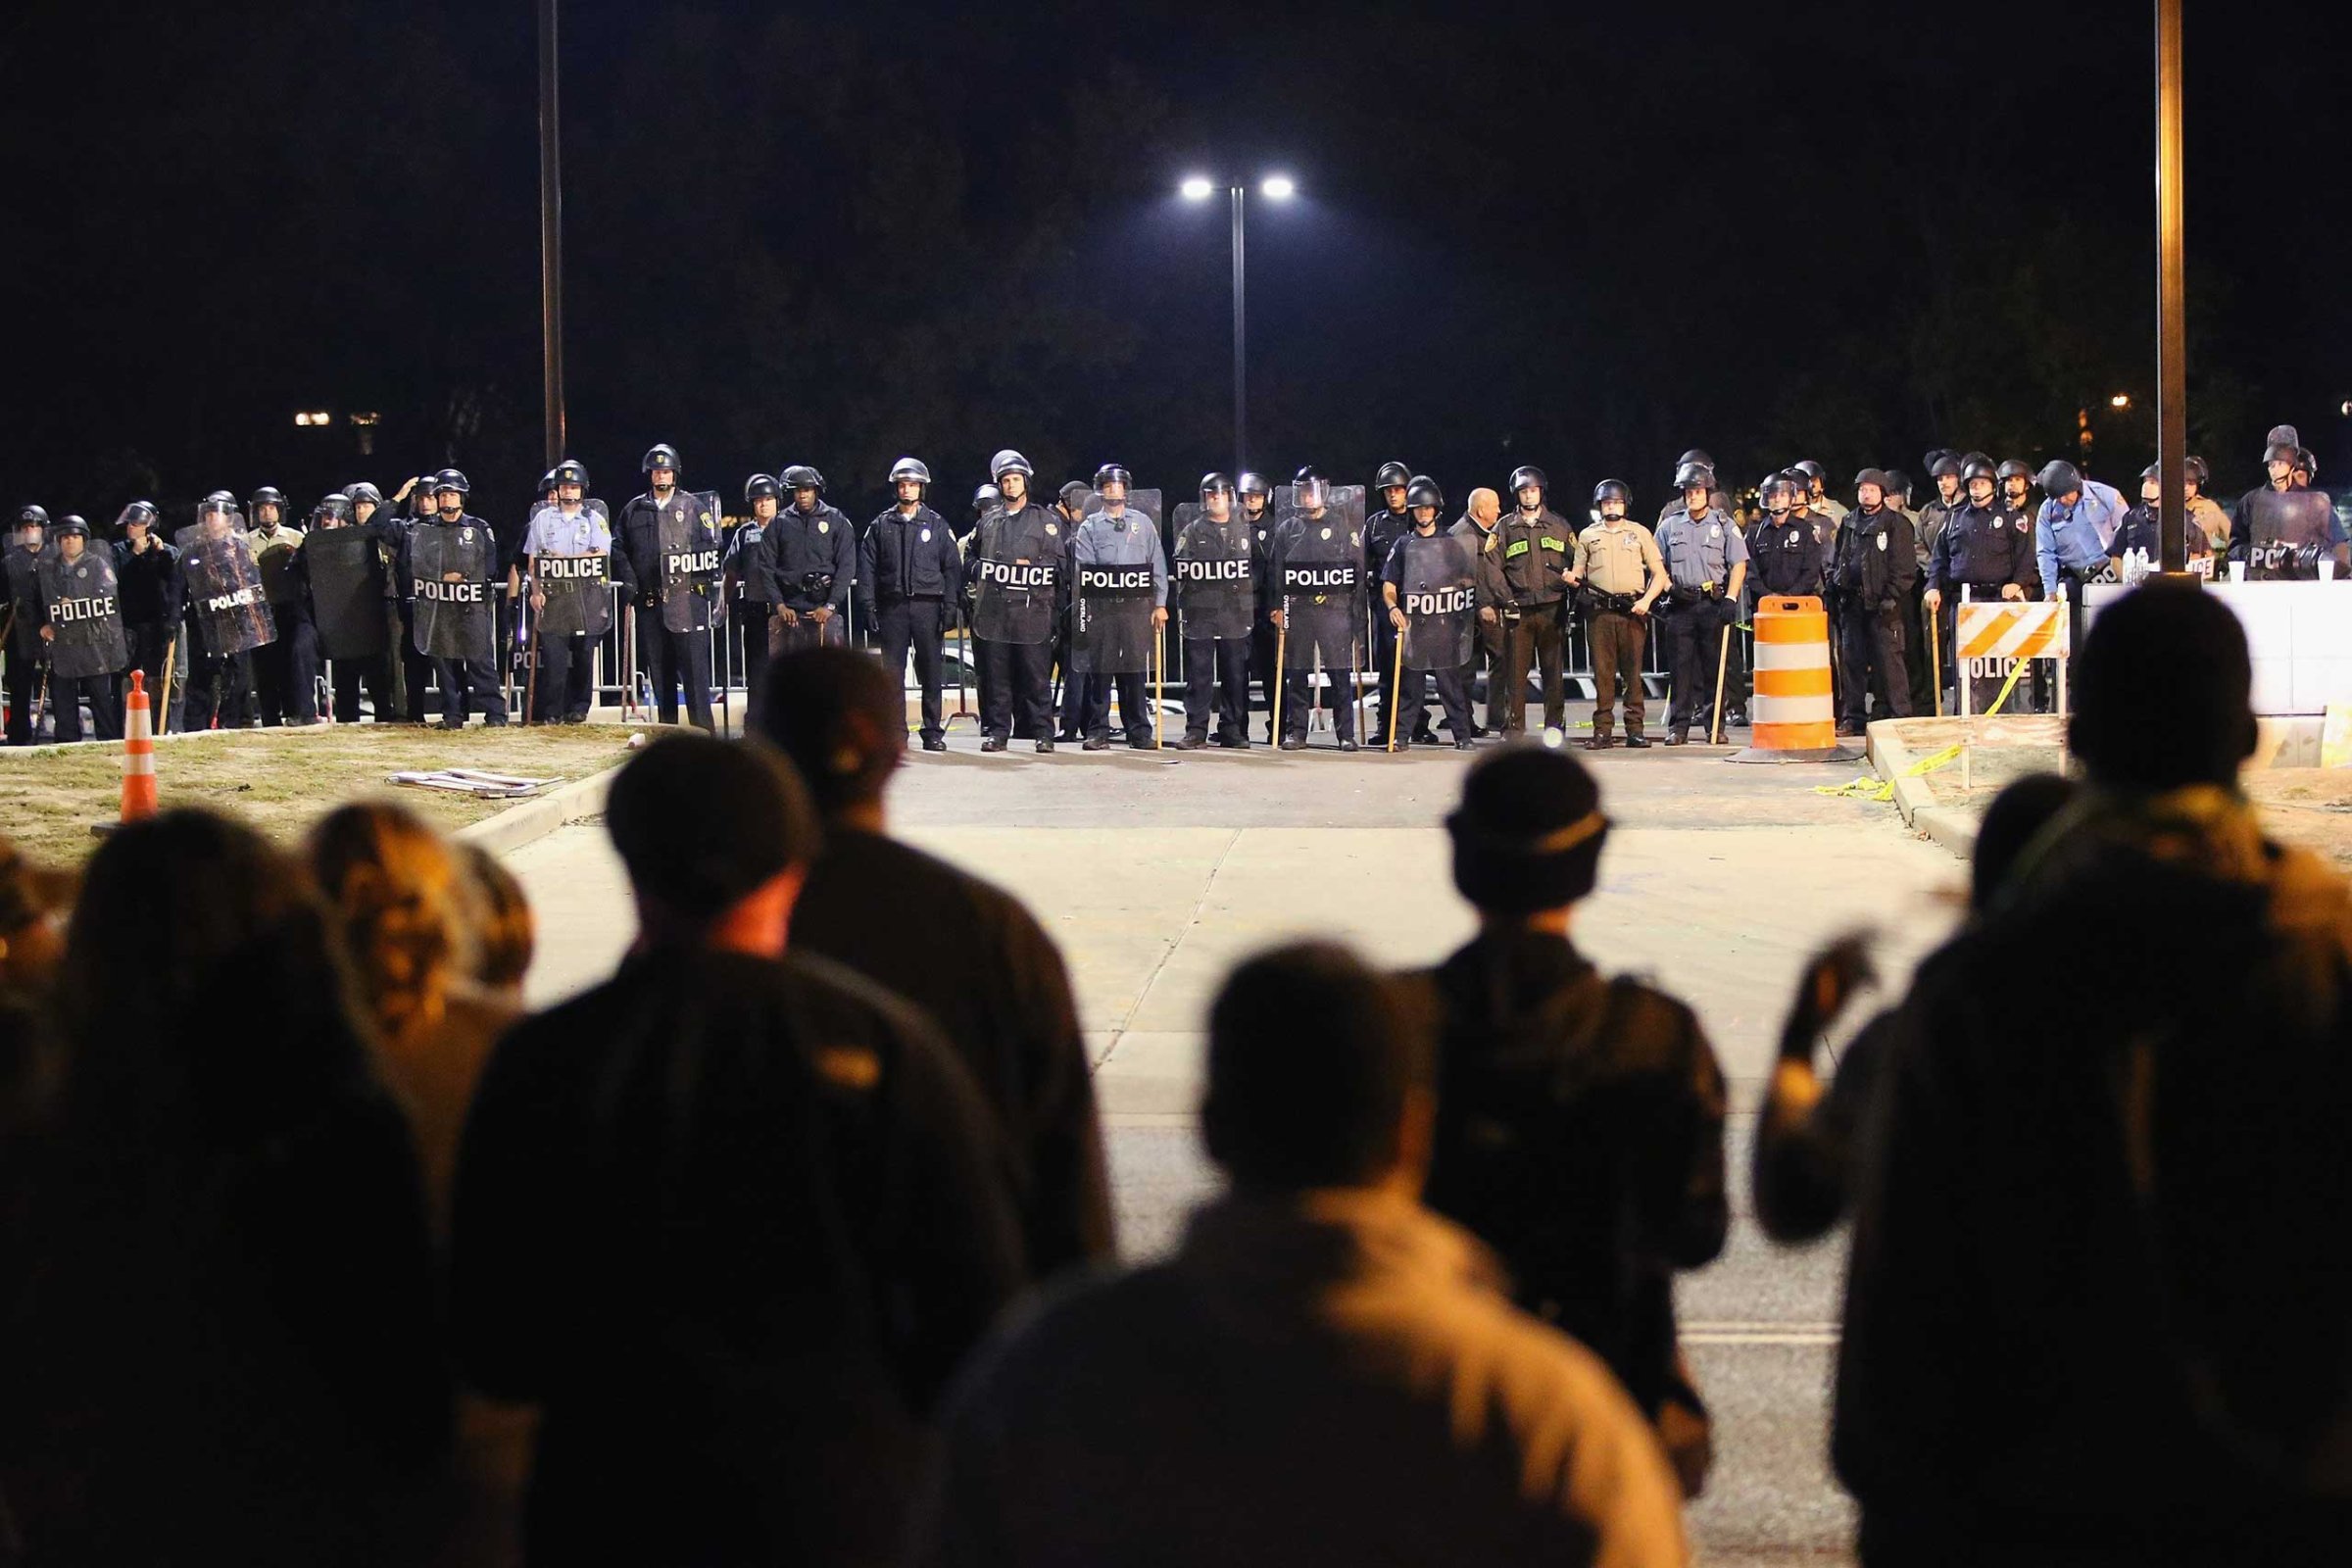 Police face off with demonstrators outside the police station as protests continue in the wake of 18-year-old Michael Brown's death on Oct. 22, 2014 in Ferguson, Missouri.